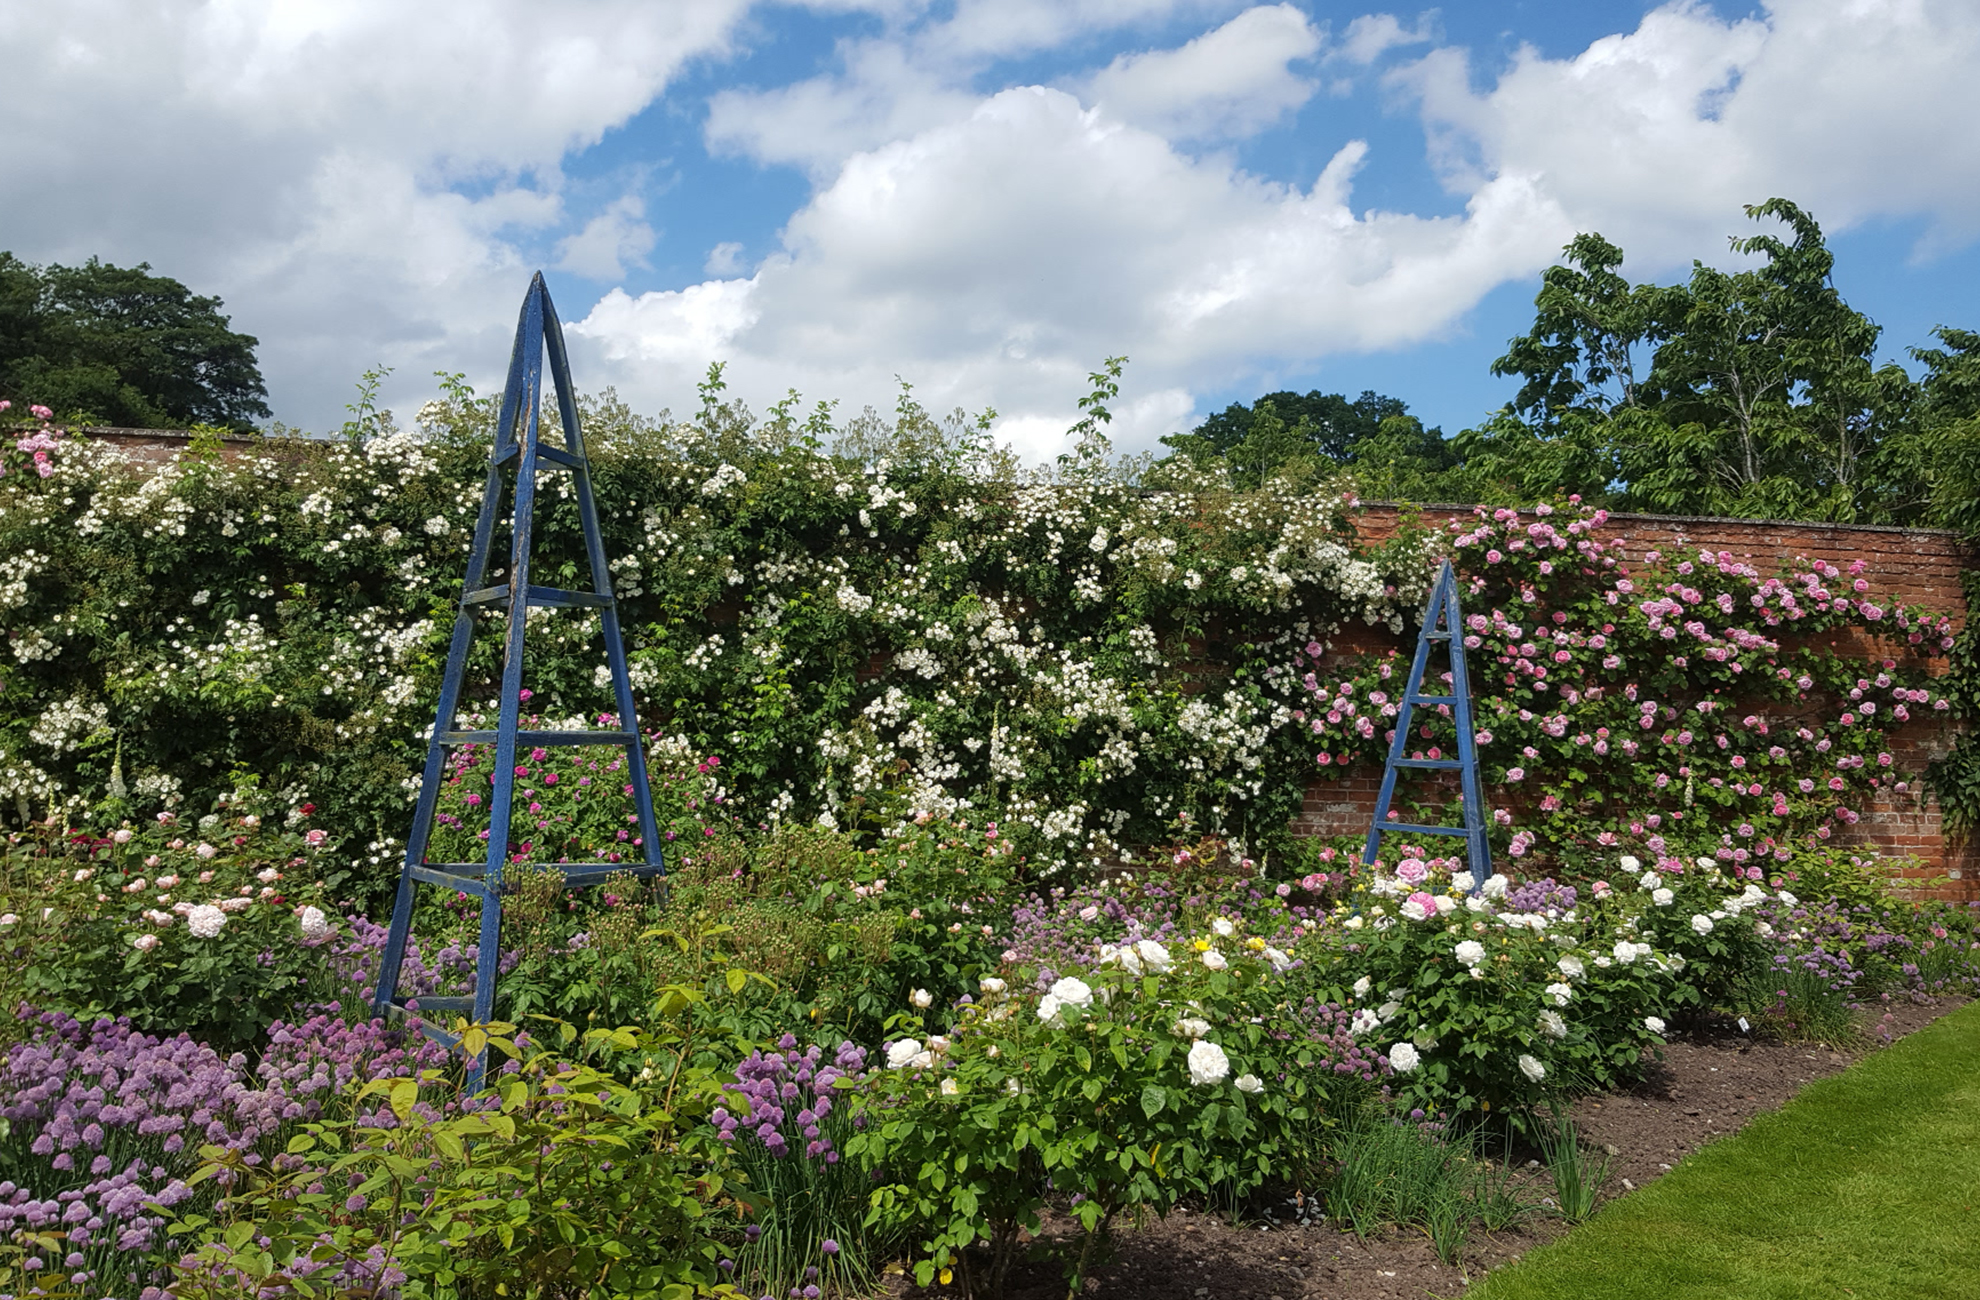 Roses in the Walled Gardens of Combermere Abbey – accommodation and wedding venue in Cheshire